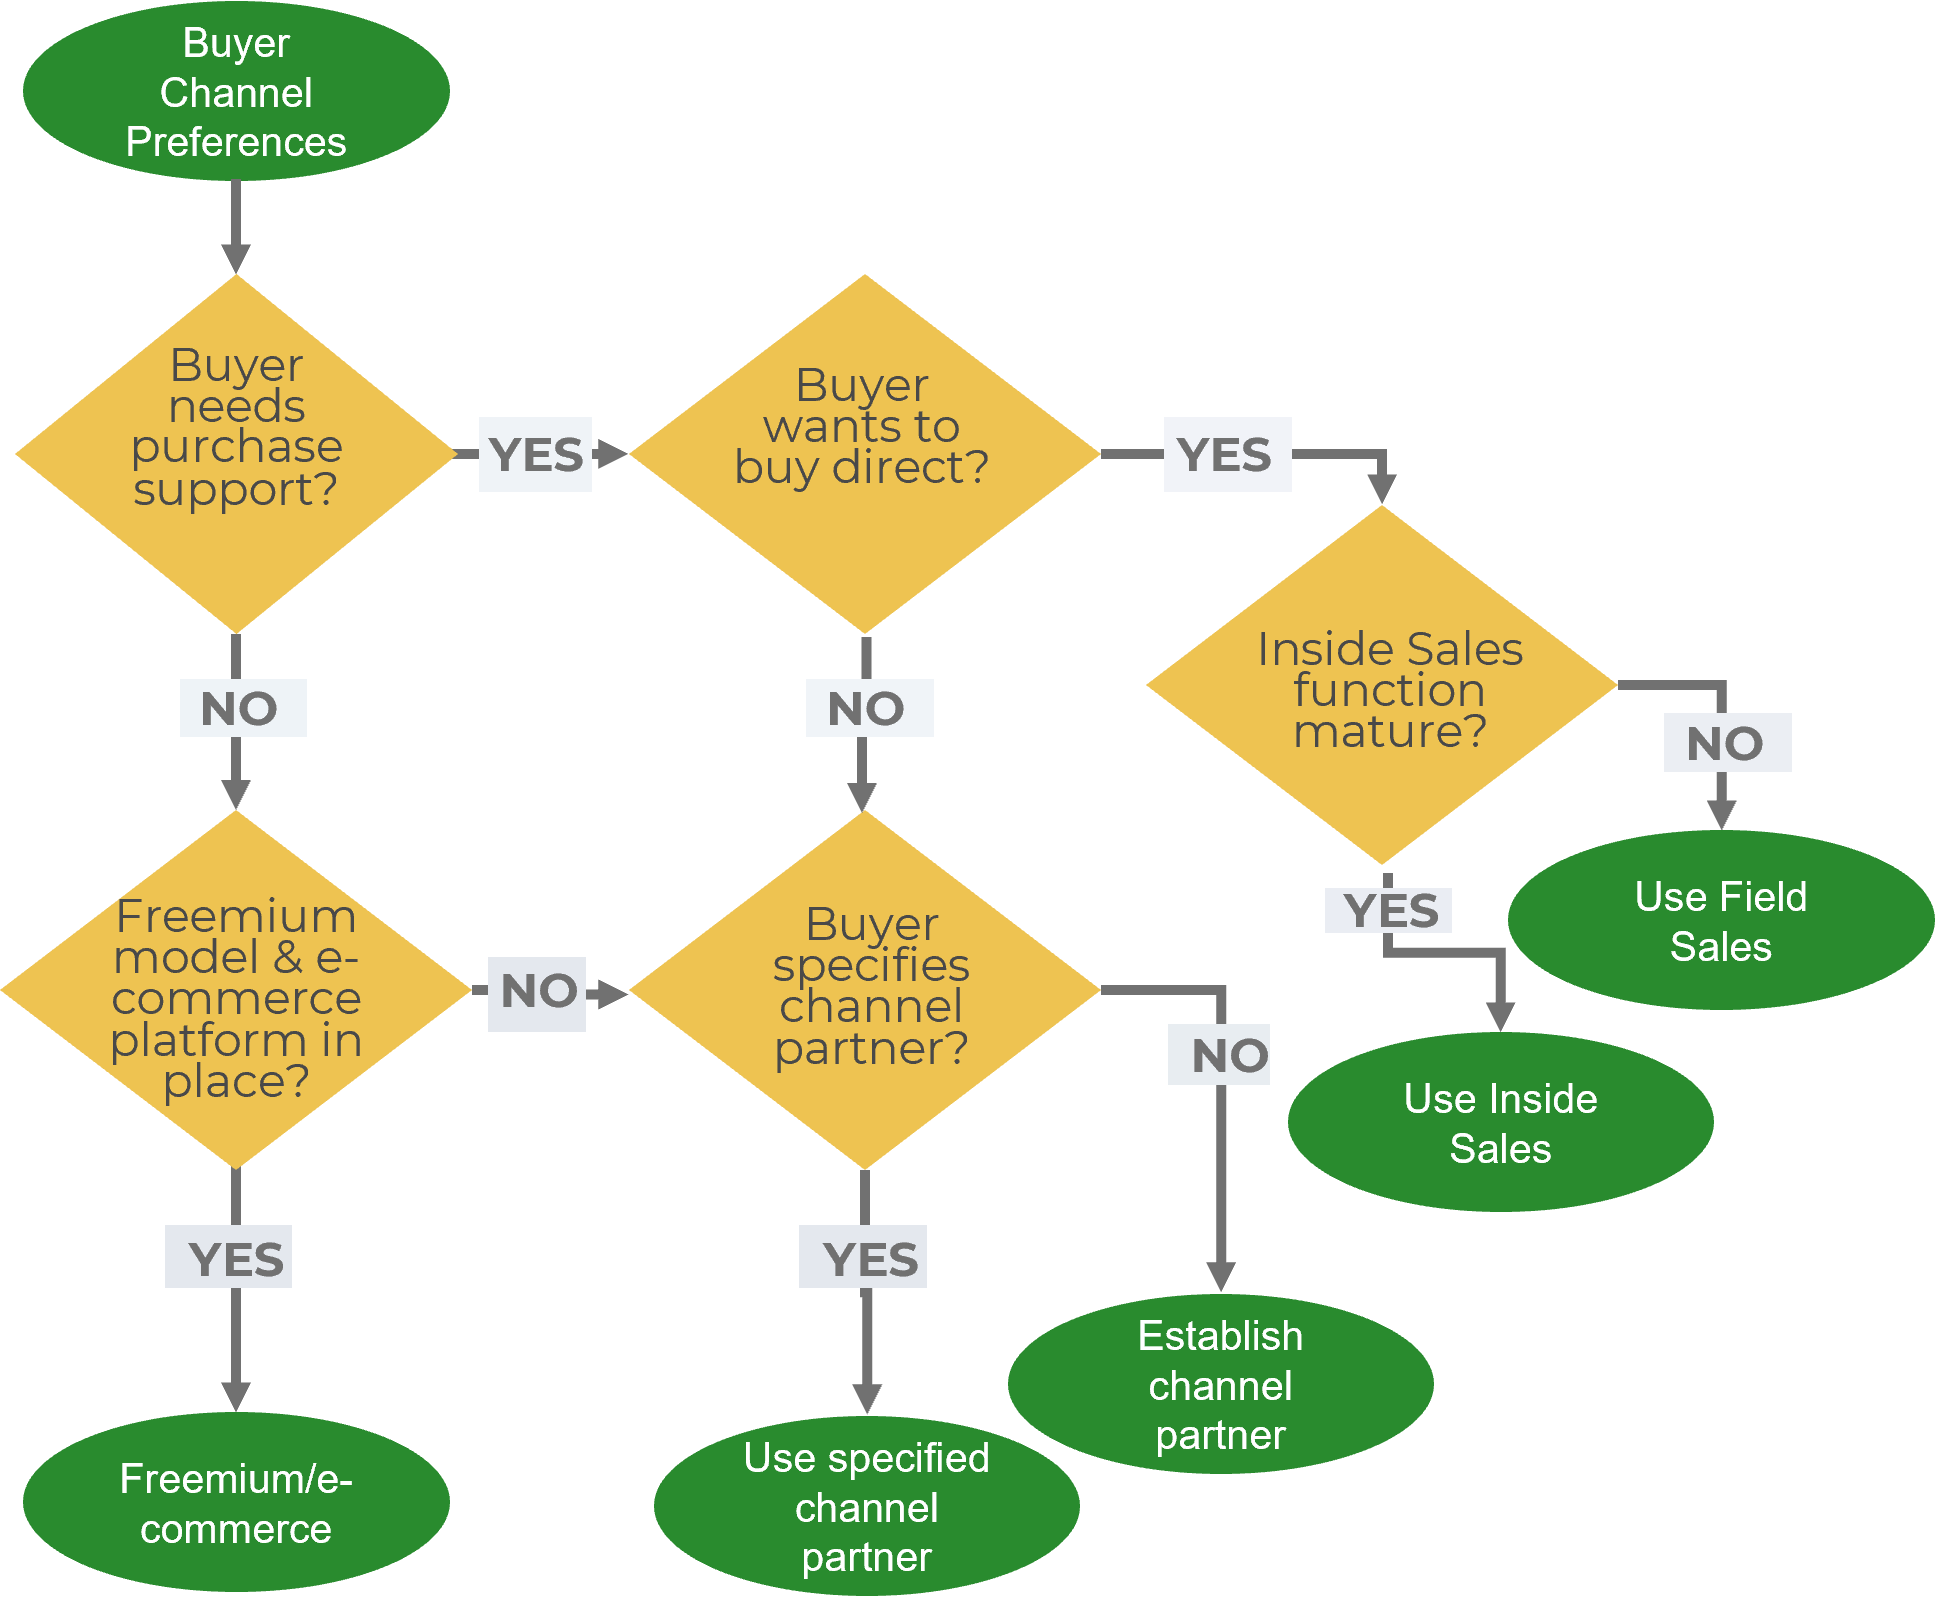 Flowchart on how to capture 'Buyer Channel Preferences' with five possible outcomes: 'Freemium/e-commerce', 'Use specified channel partner', 'Establish channel partner', 'Use Inside Sales', and 'Use Field Sales'.